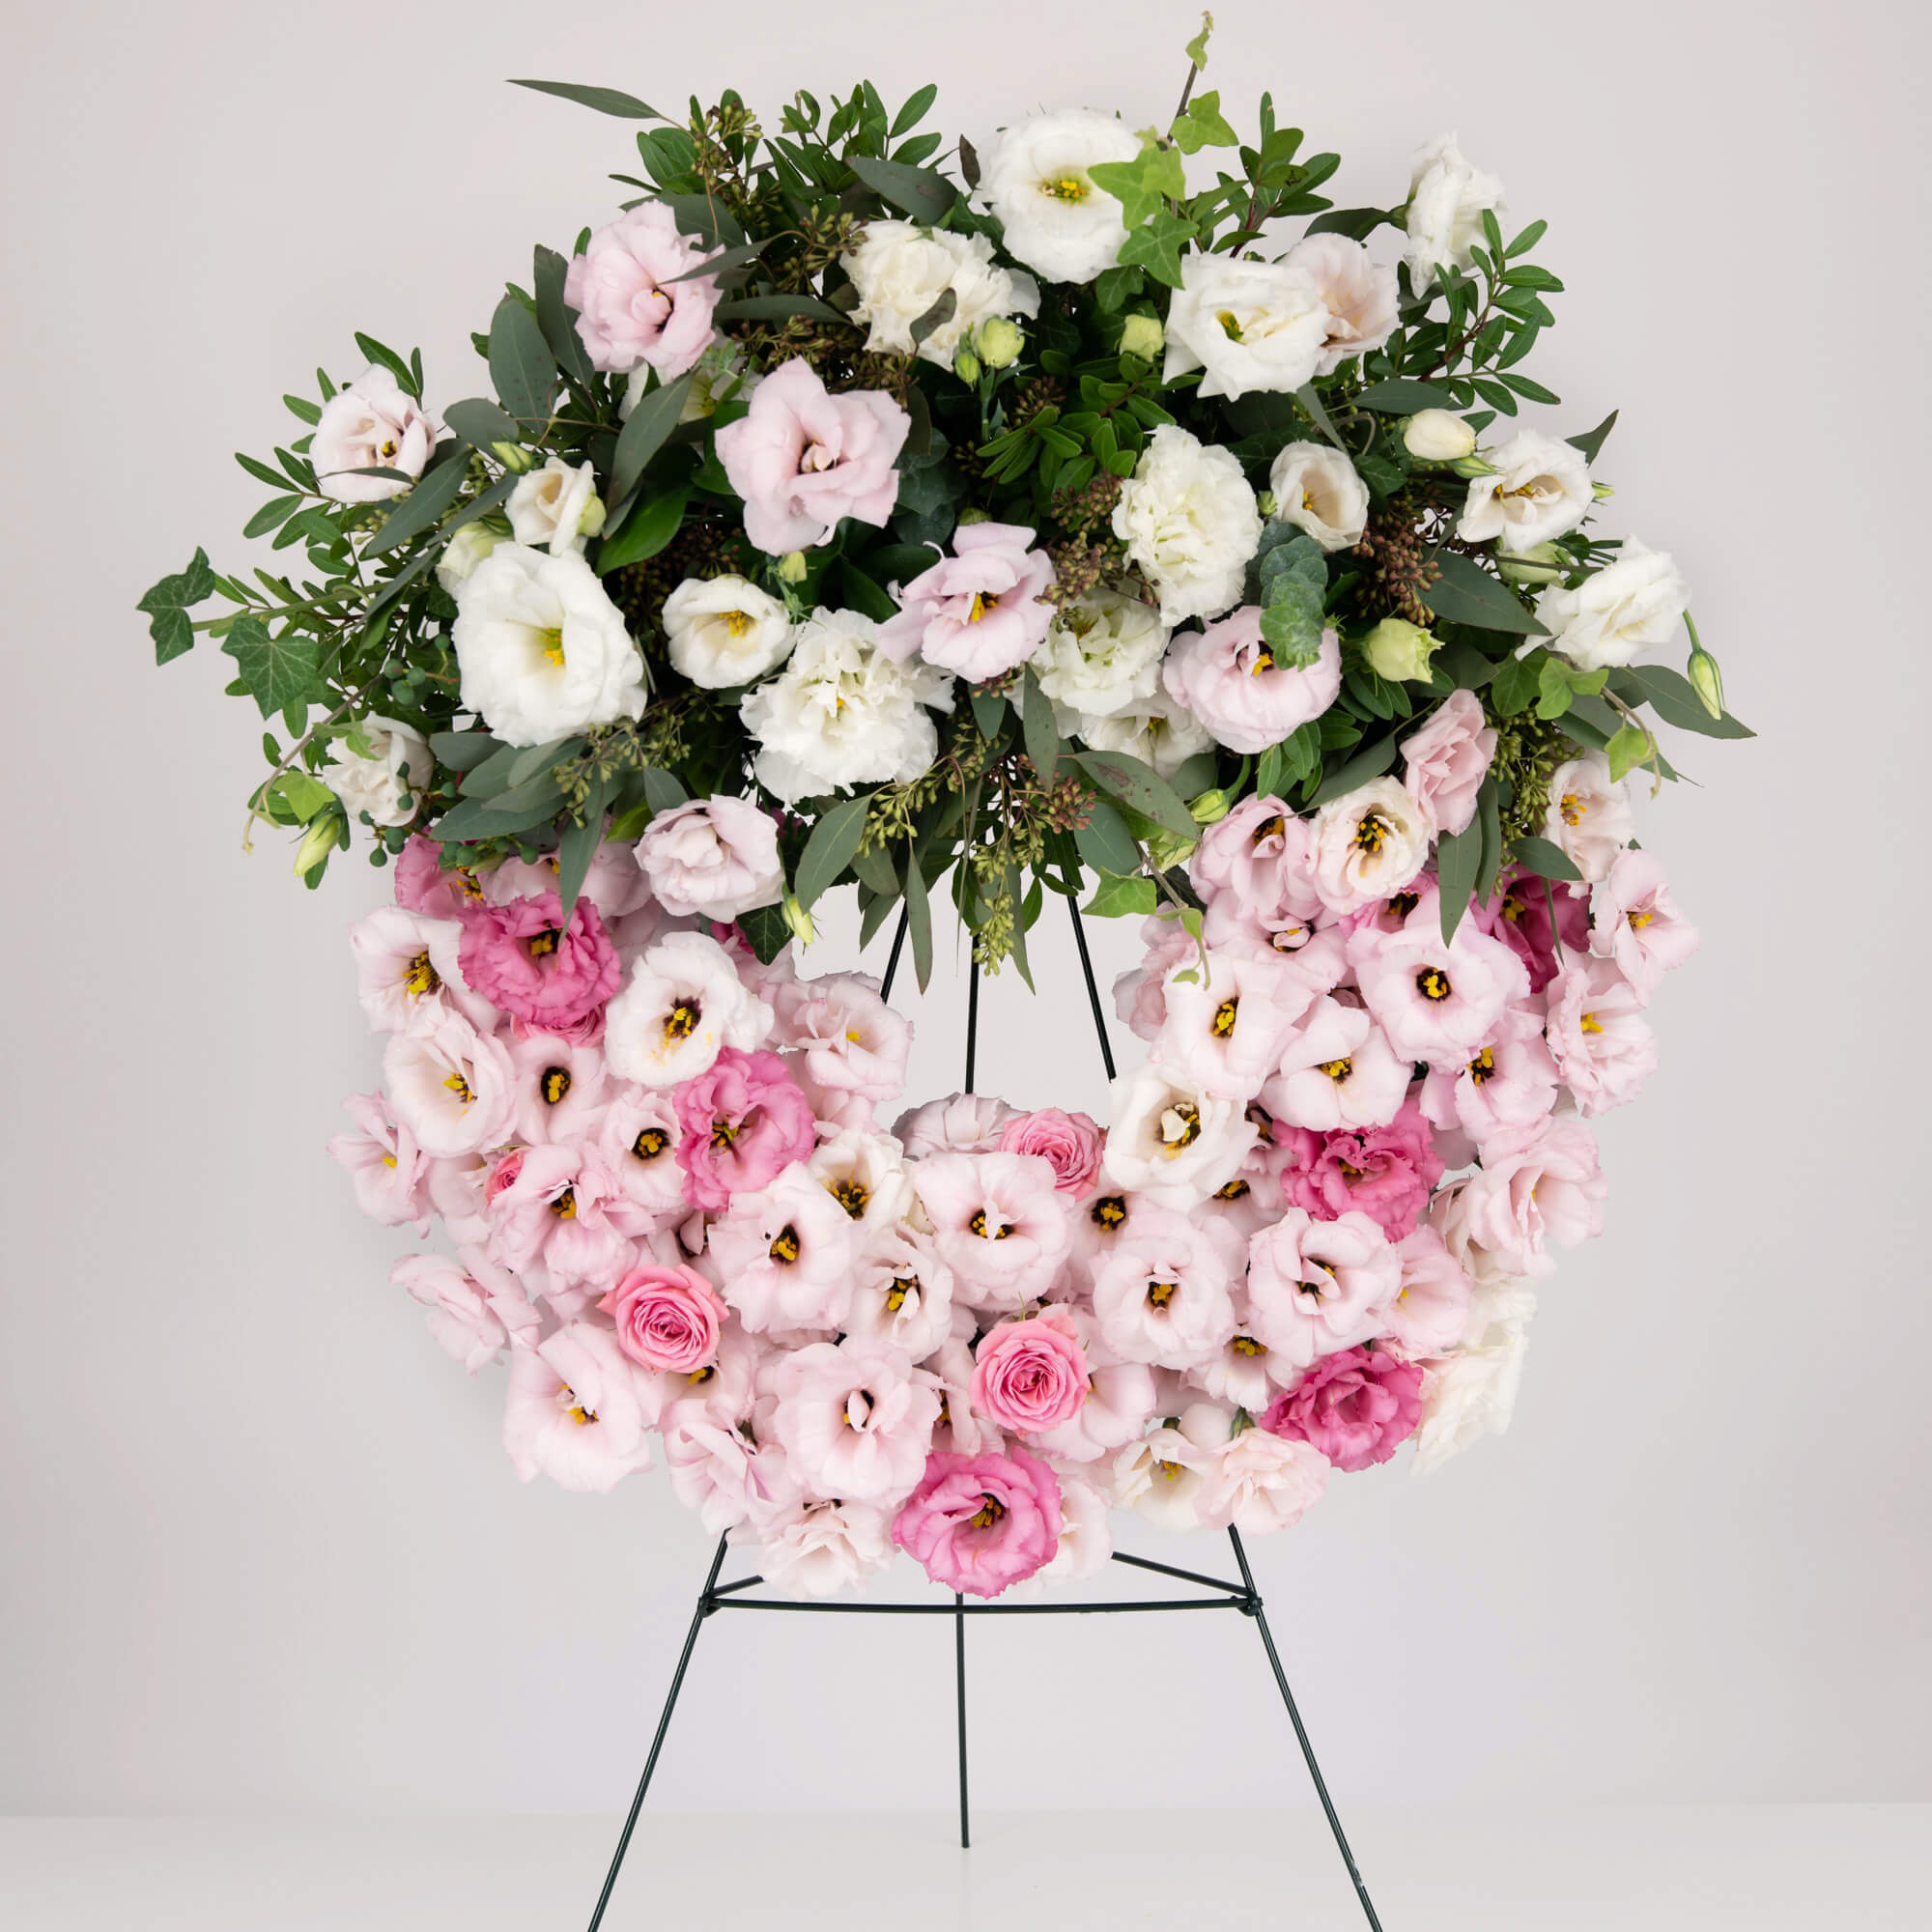 Funeral wreath with pink lisianthus